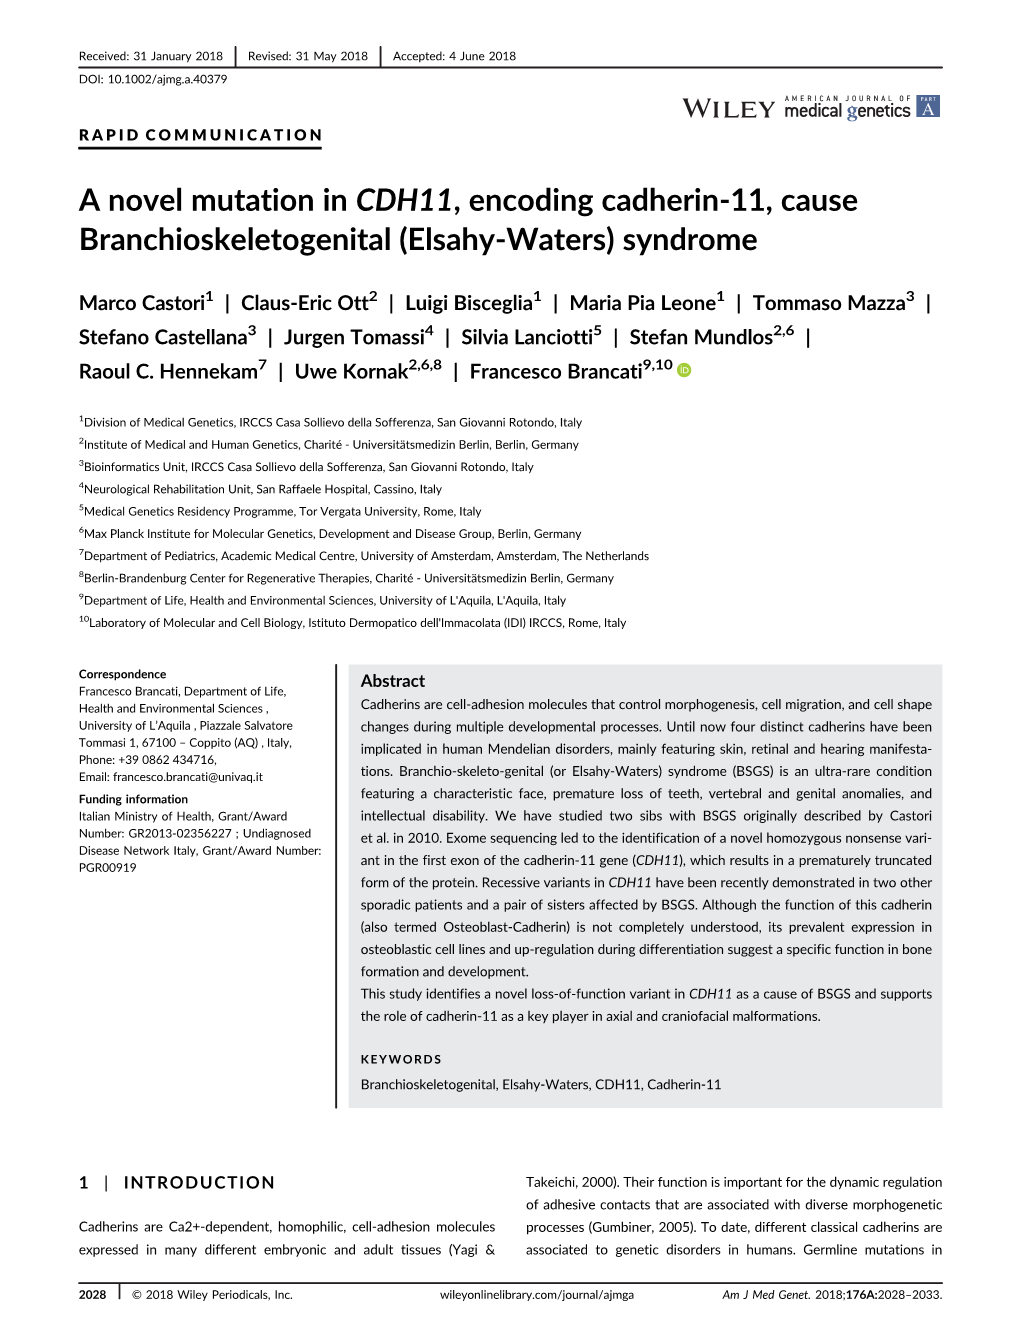 A Novel Mutation in CDH11, Encoding Cadherin-11, Cause Branchioskeletogenital (Elsahy-Waters) Syndrome